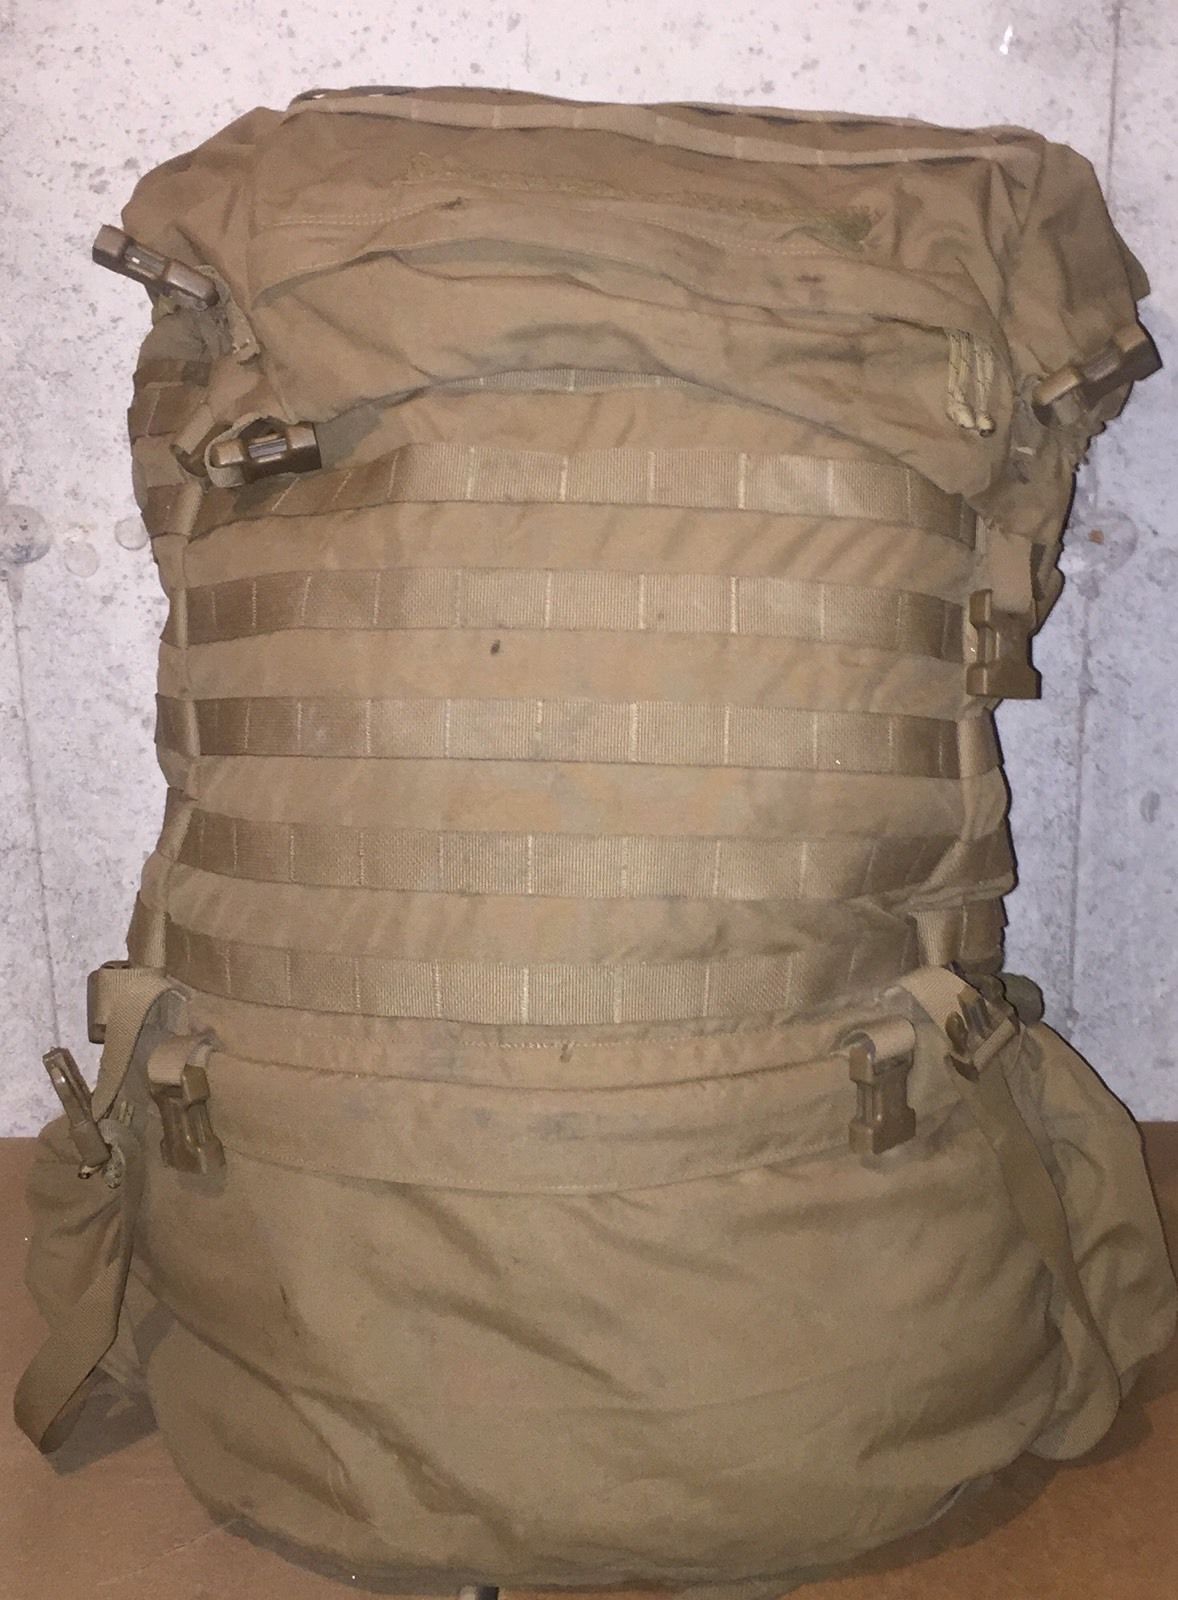 U.S. Military - Two (2) USMC FILBE MAIN PACK COYOTE BROWN 